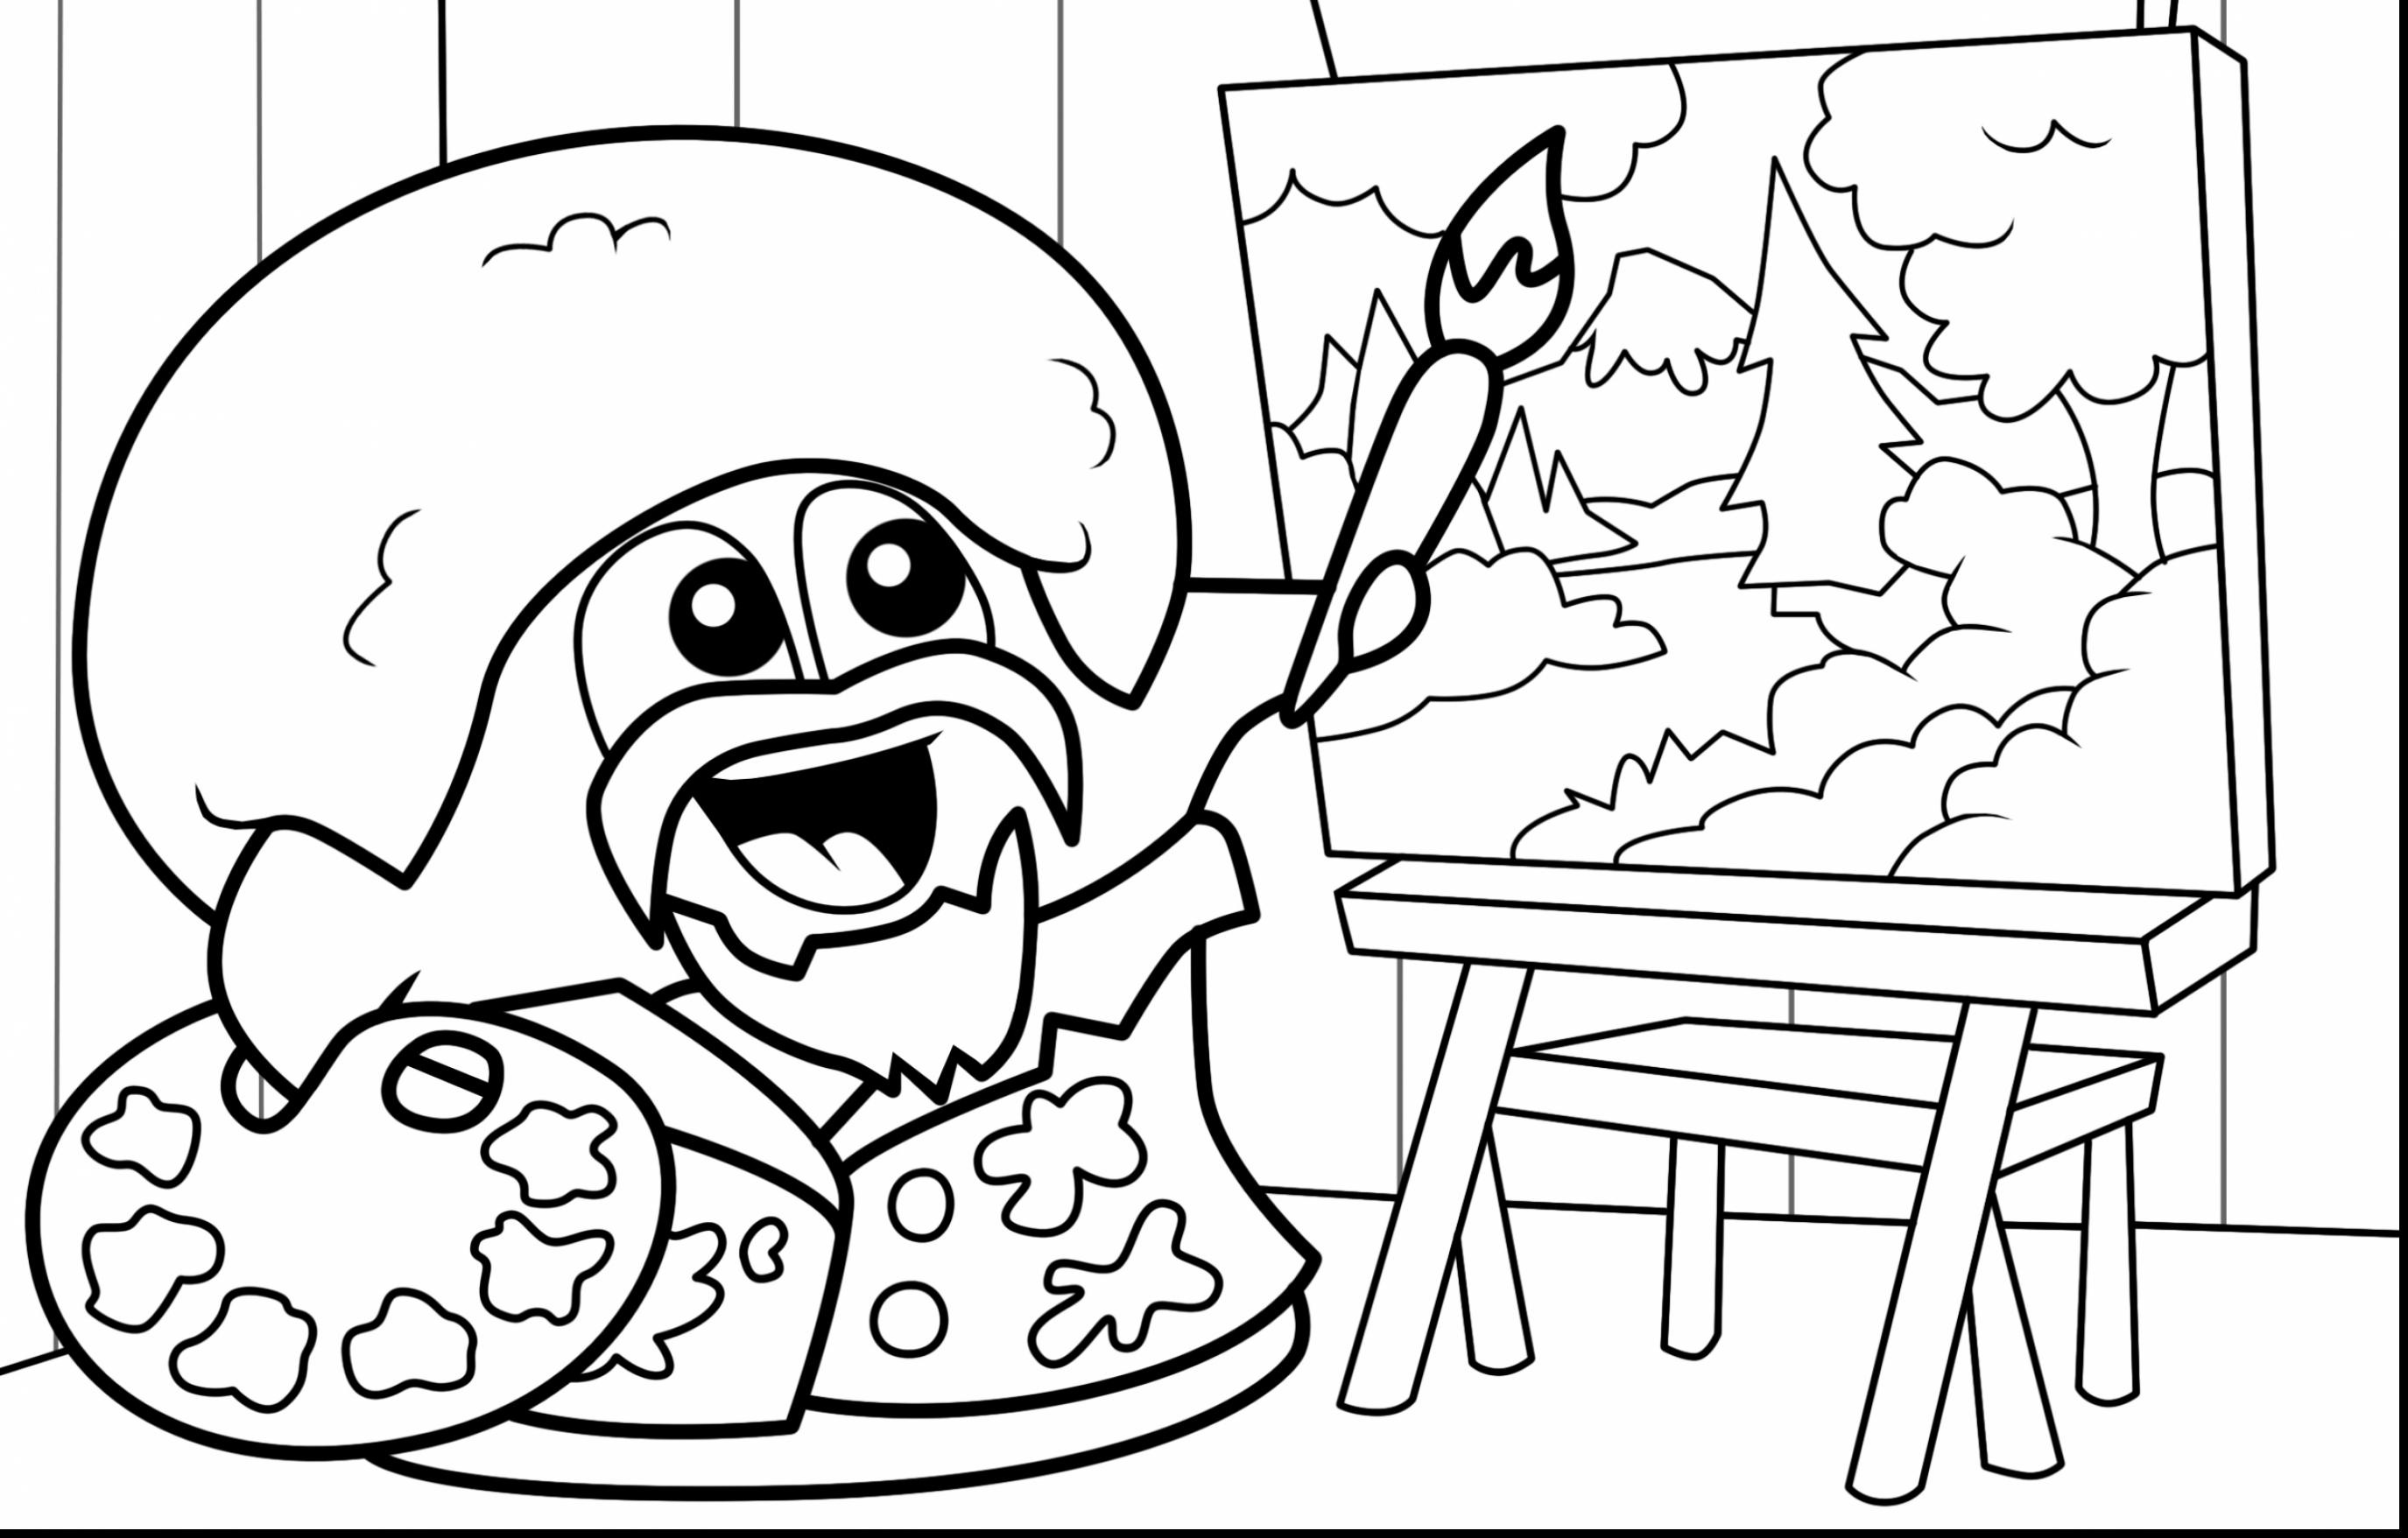 Blob Fish Coloring Pages Coloring M Coloring Pages